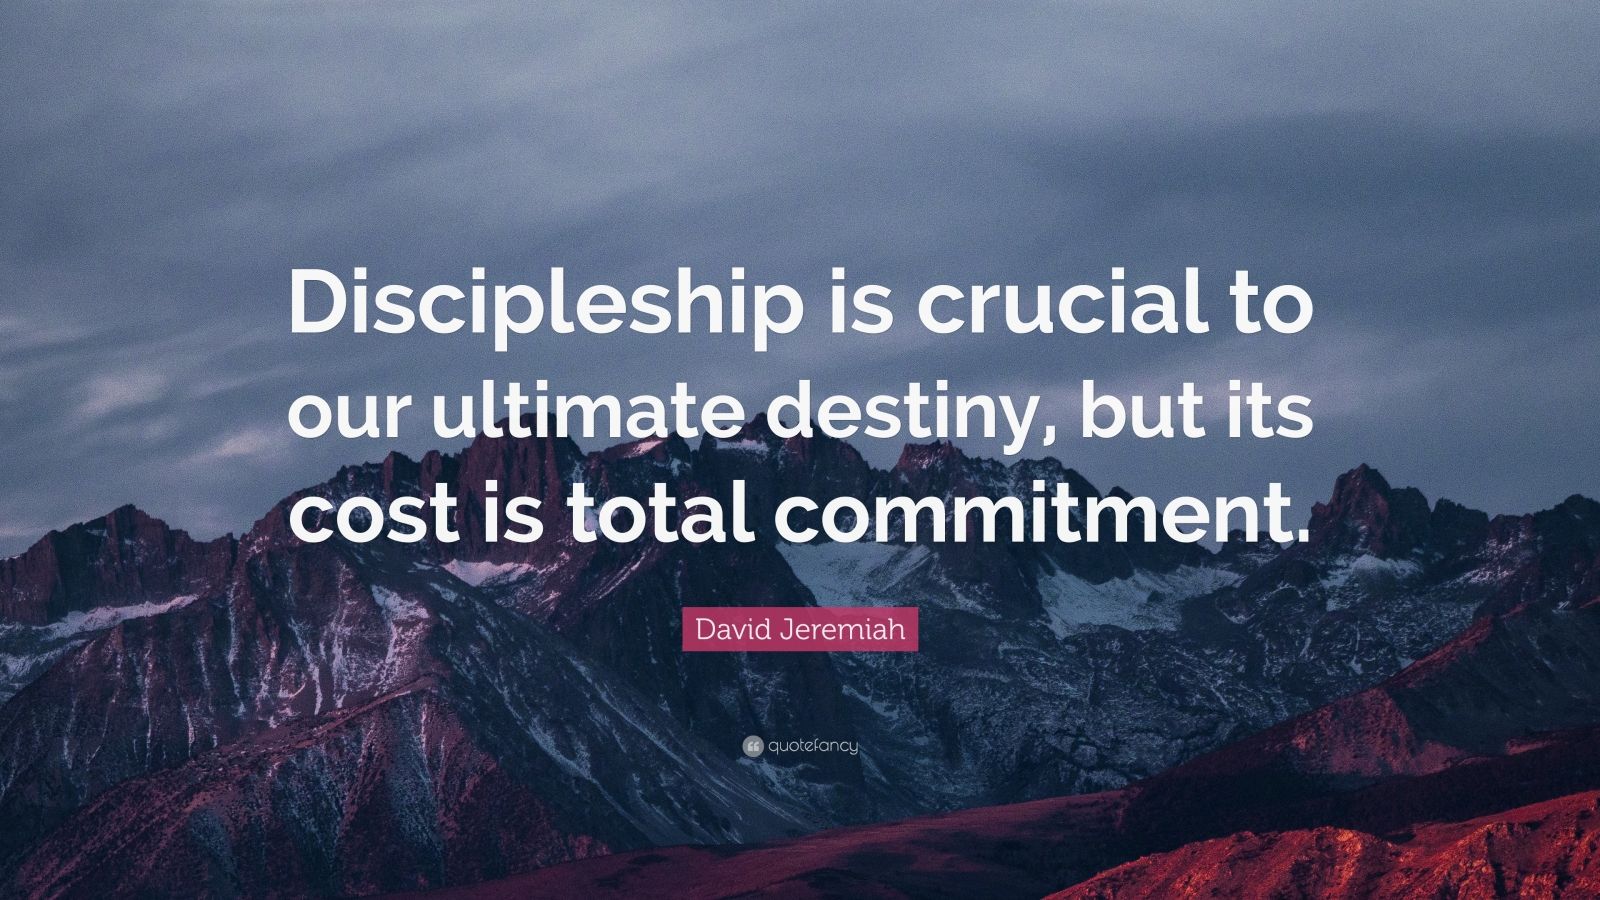 David Jeremiah Quote “Discipleship is crucial to our ultimate destiny